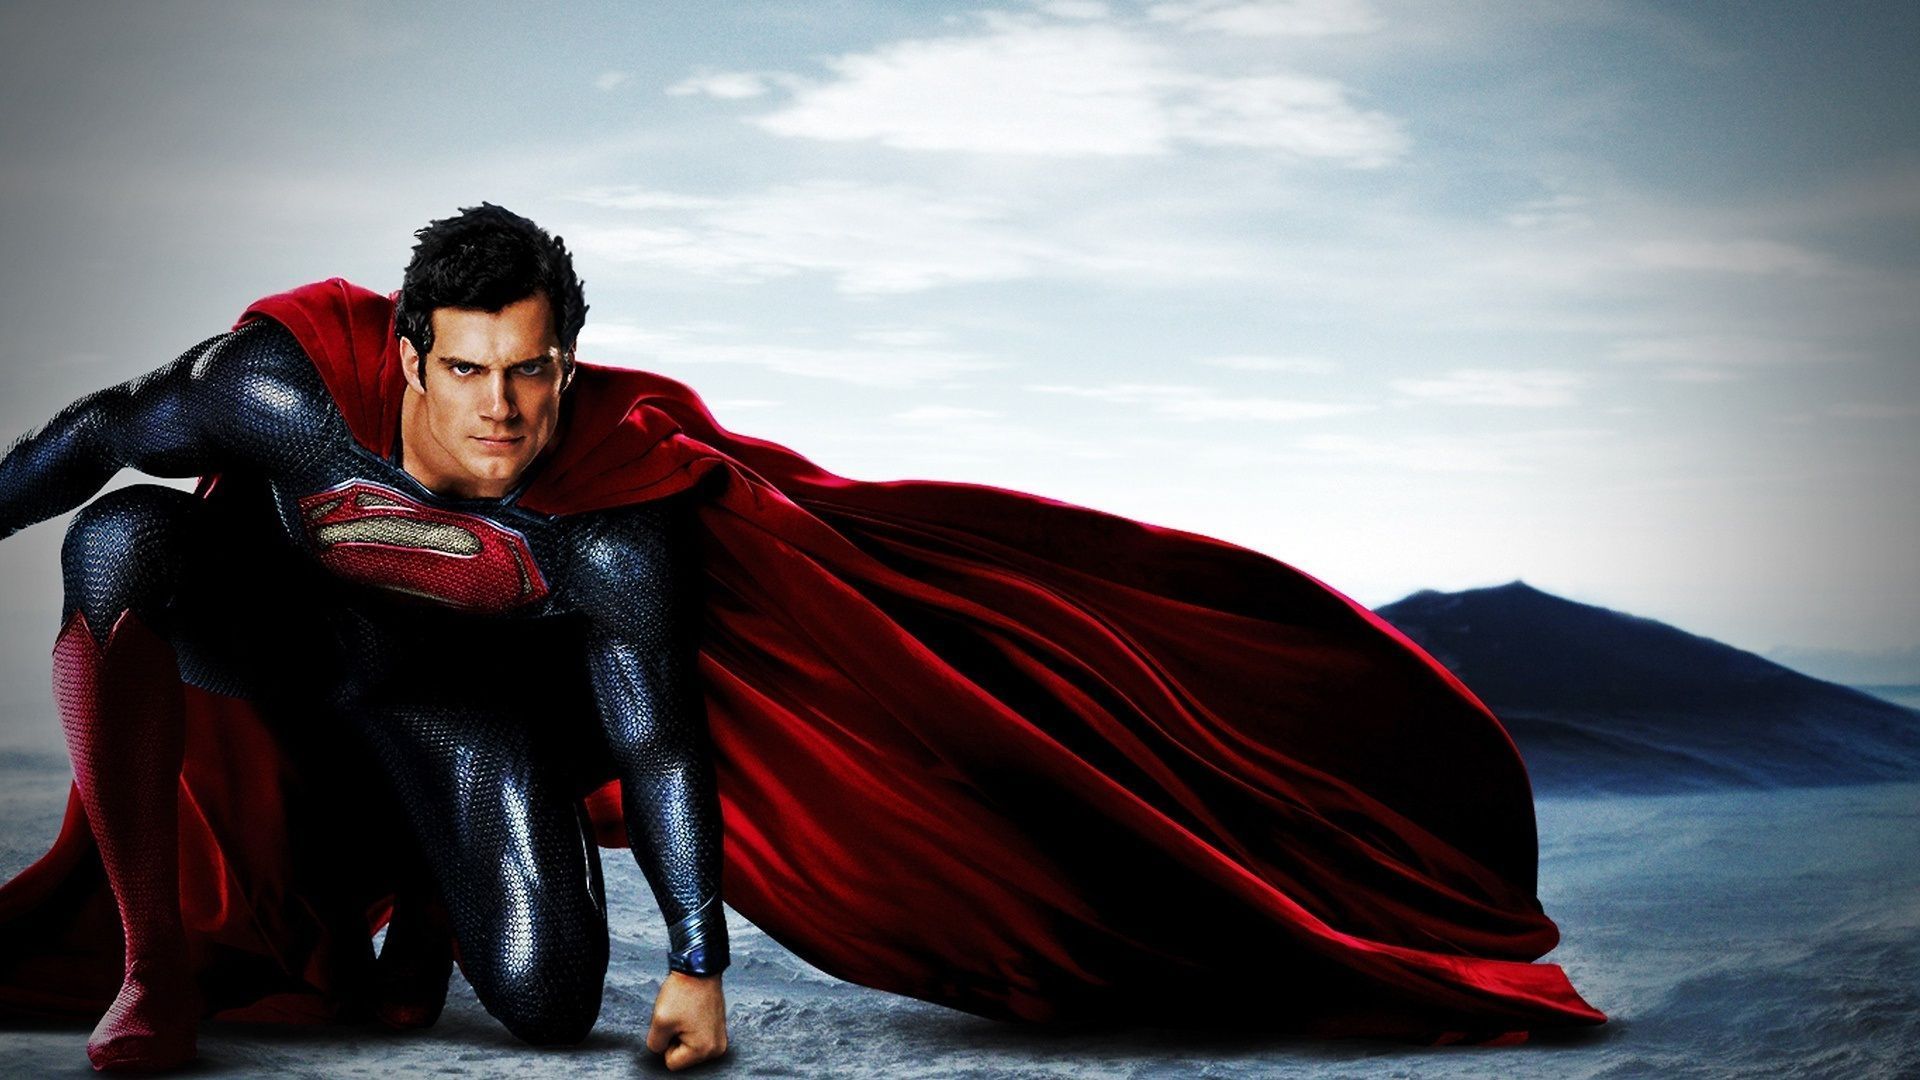 Superman HD Wallpapers Free Download - Tremendous Wallpapers